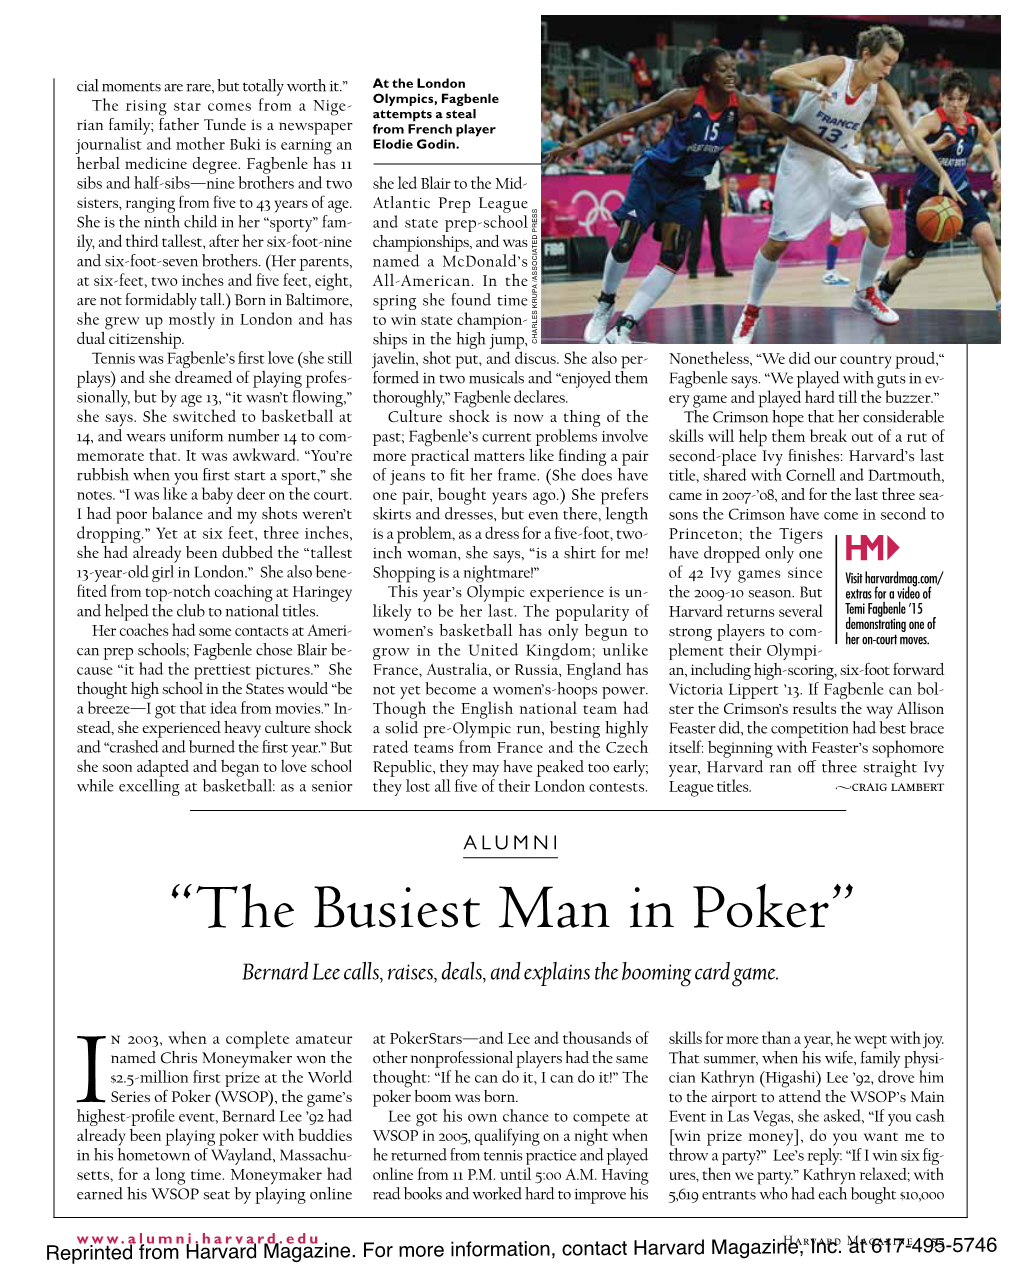 “The Busiest Man in Poker” Bernard Lee Calls, Raises, Deals, and Explains the Booming Card Game